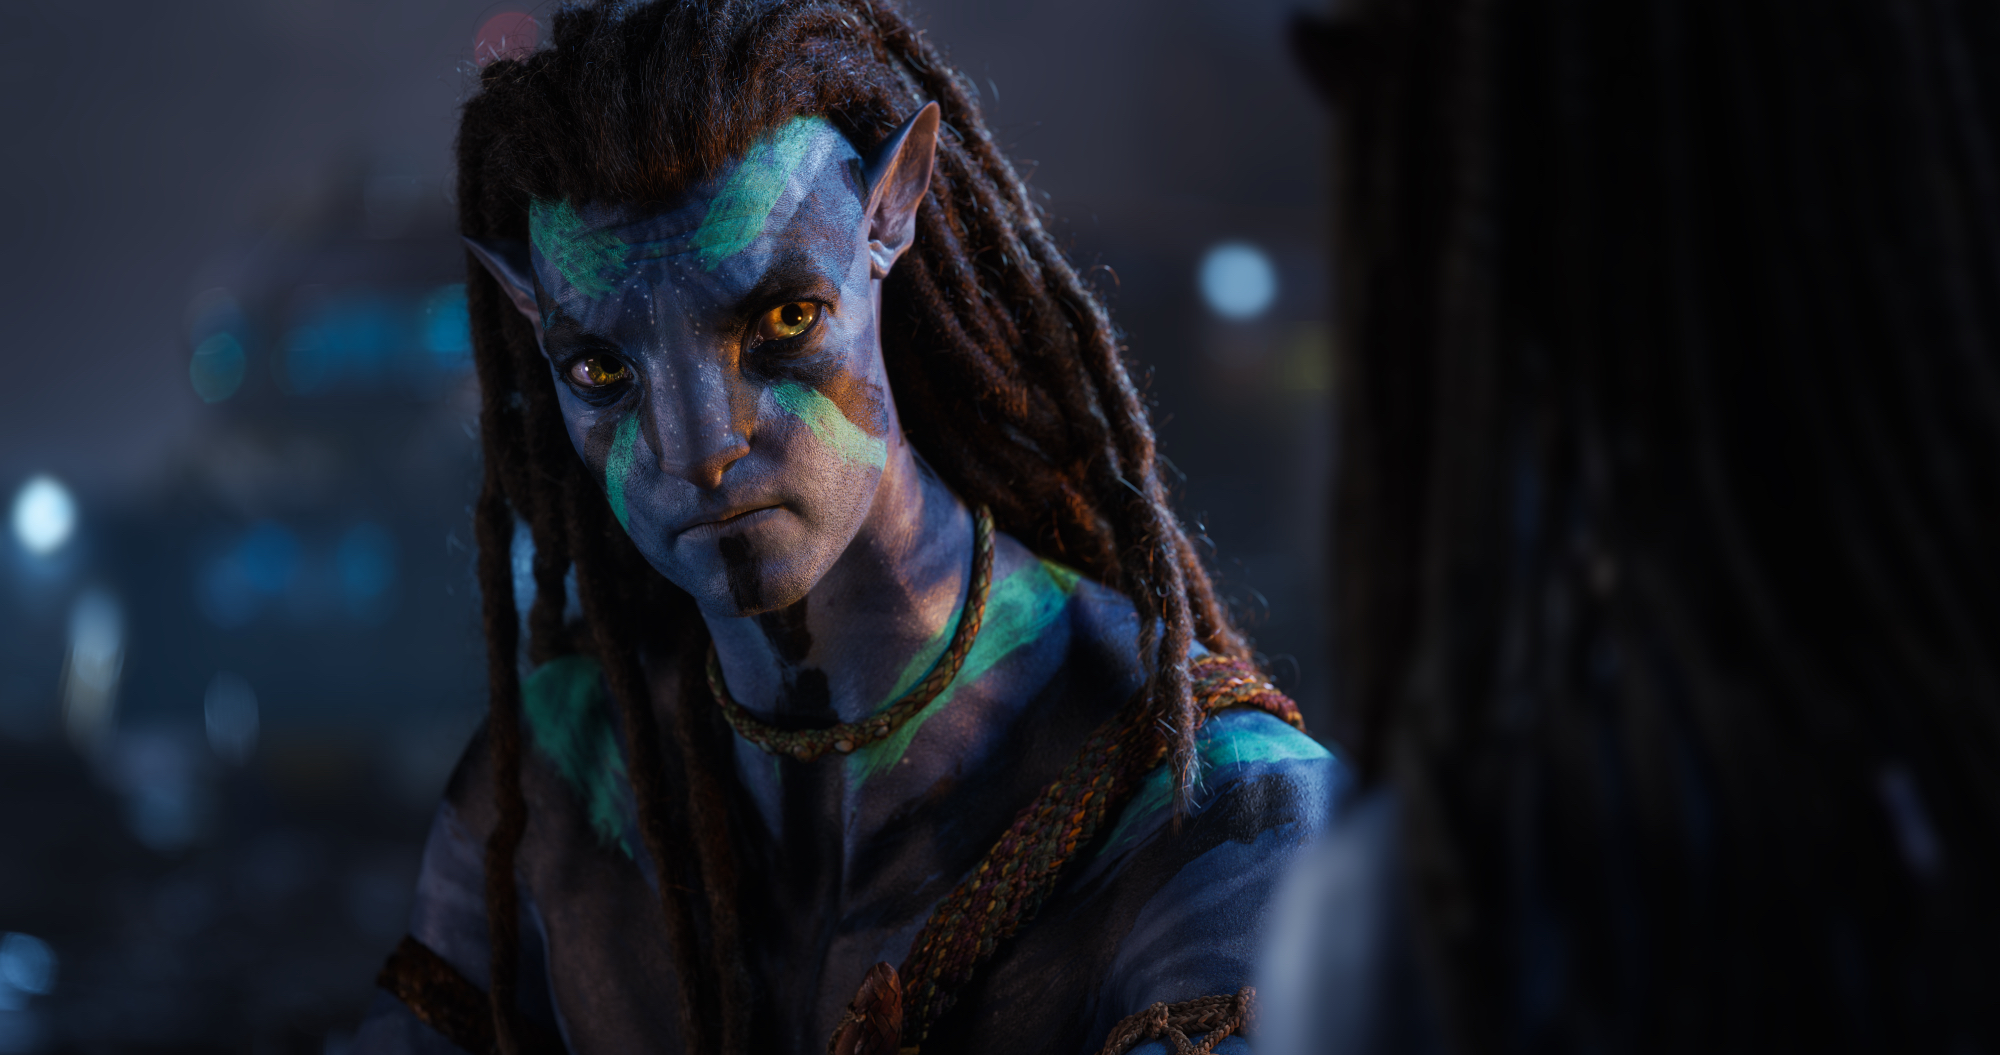 'Avatar: The Way of Water' Jake Sully (Sam Worthington) looking straight ahead with turquoise war paint on his face and body